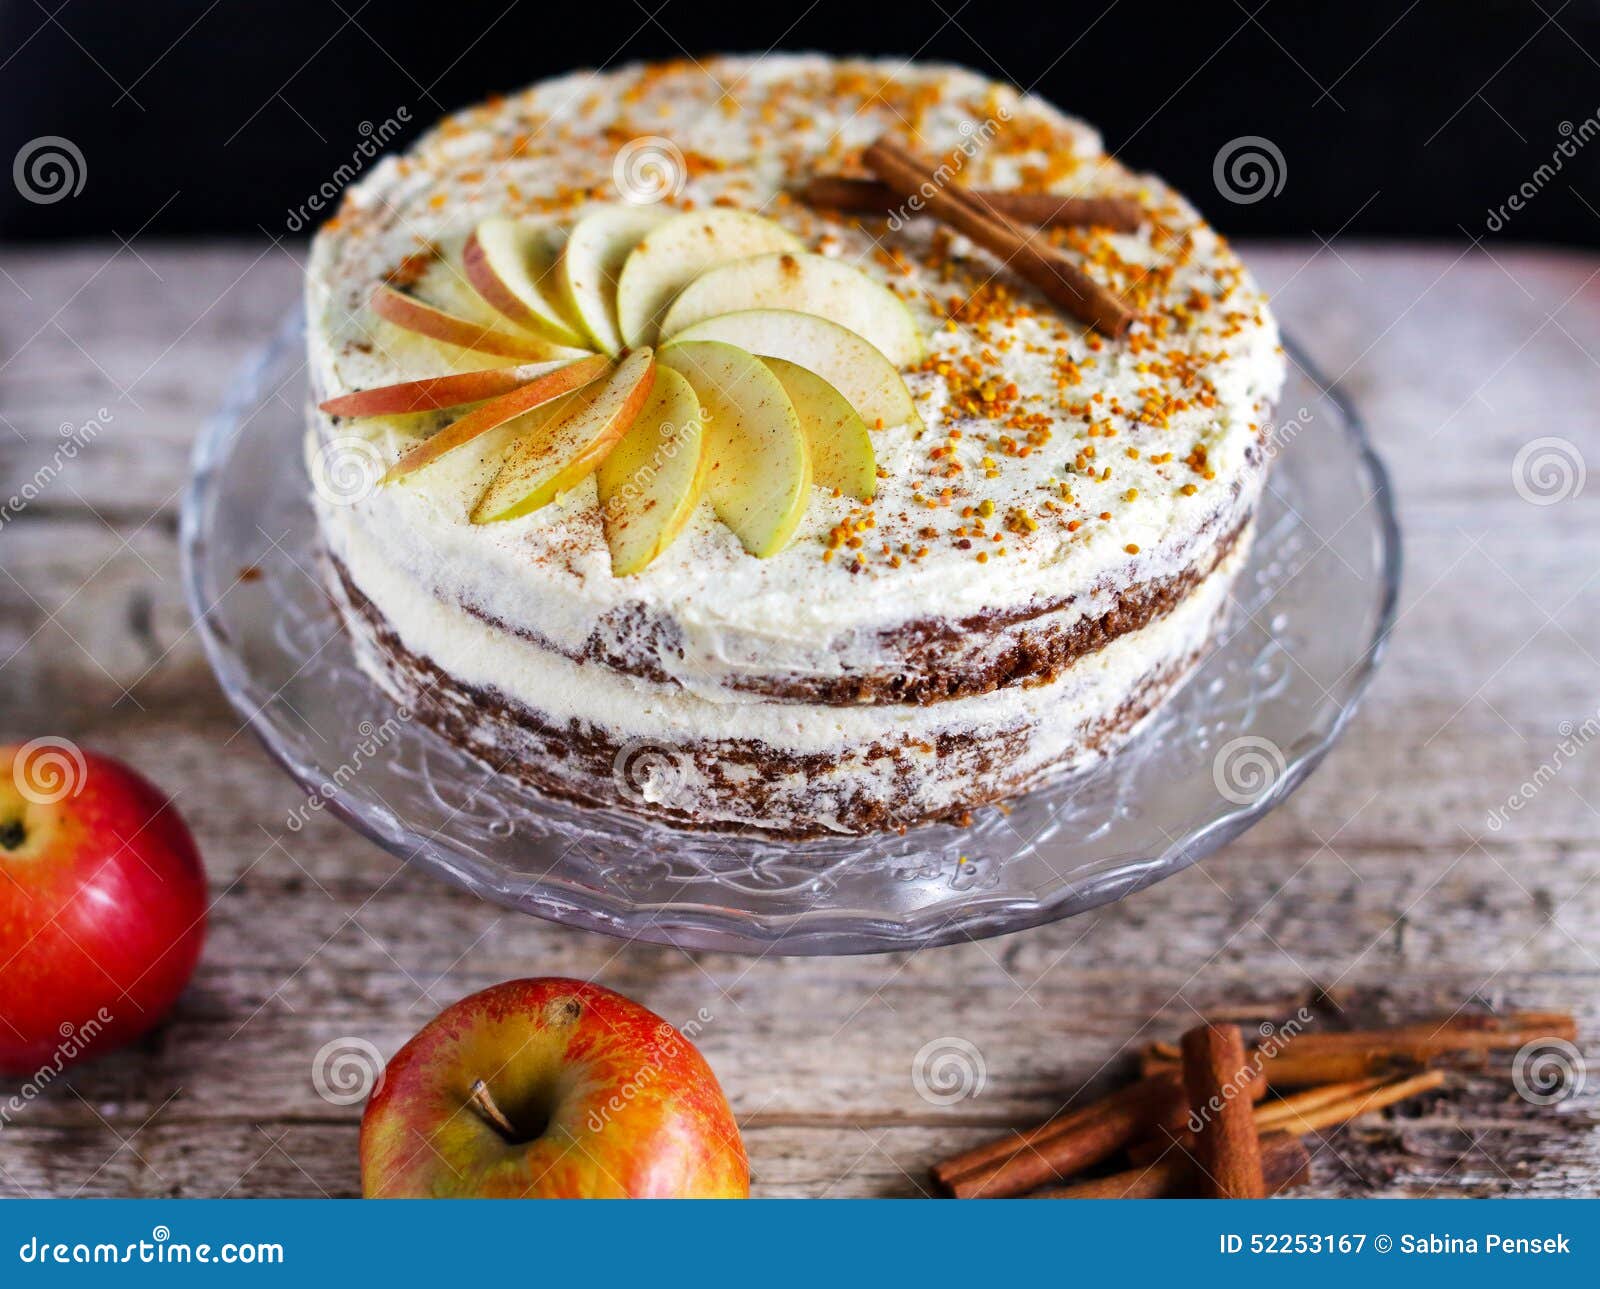 apple cinnamon layered cake with buttercream icing and bee polen